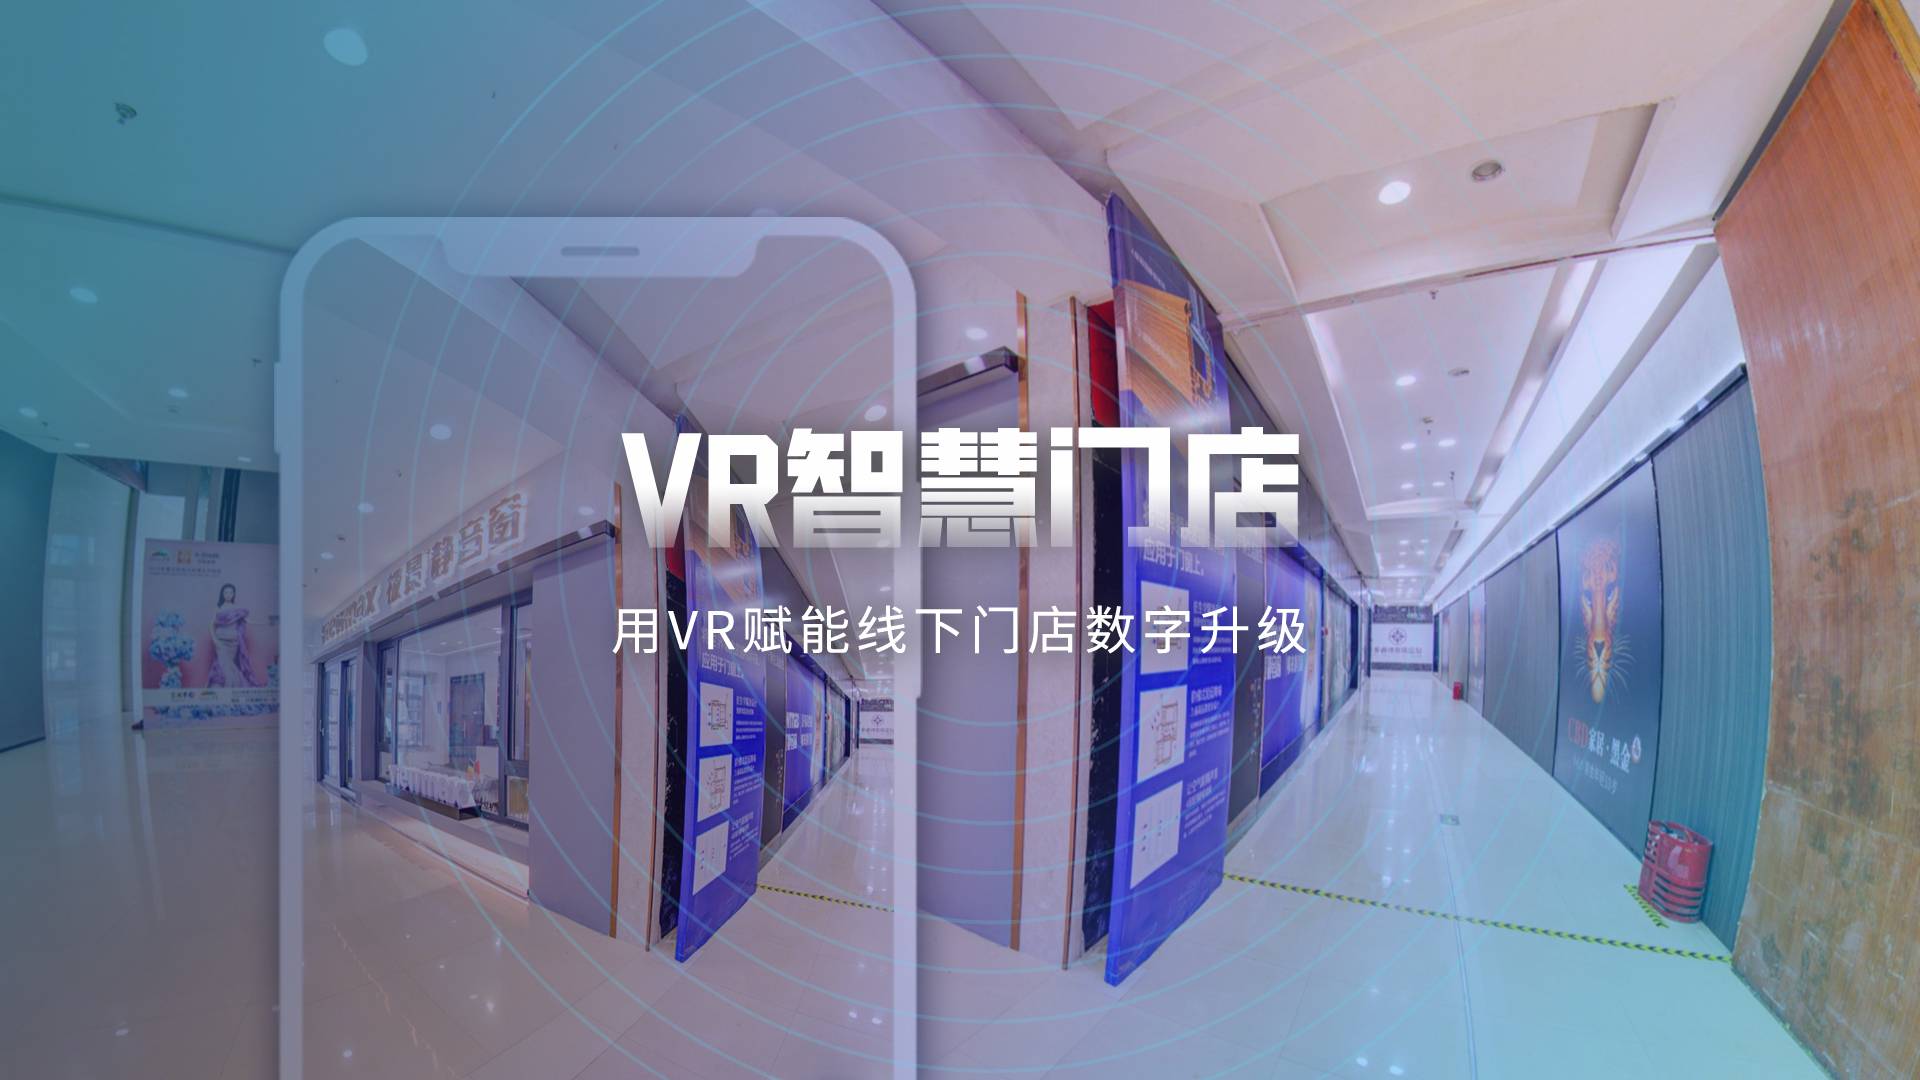 Help digital upgrade of physical stores, VR smart stores create online shopping experience